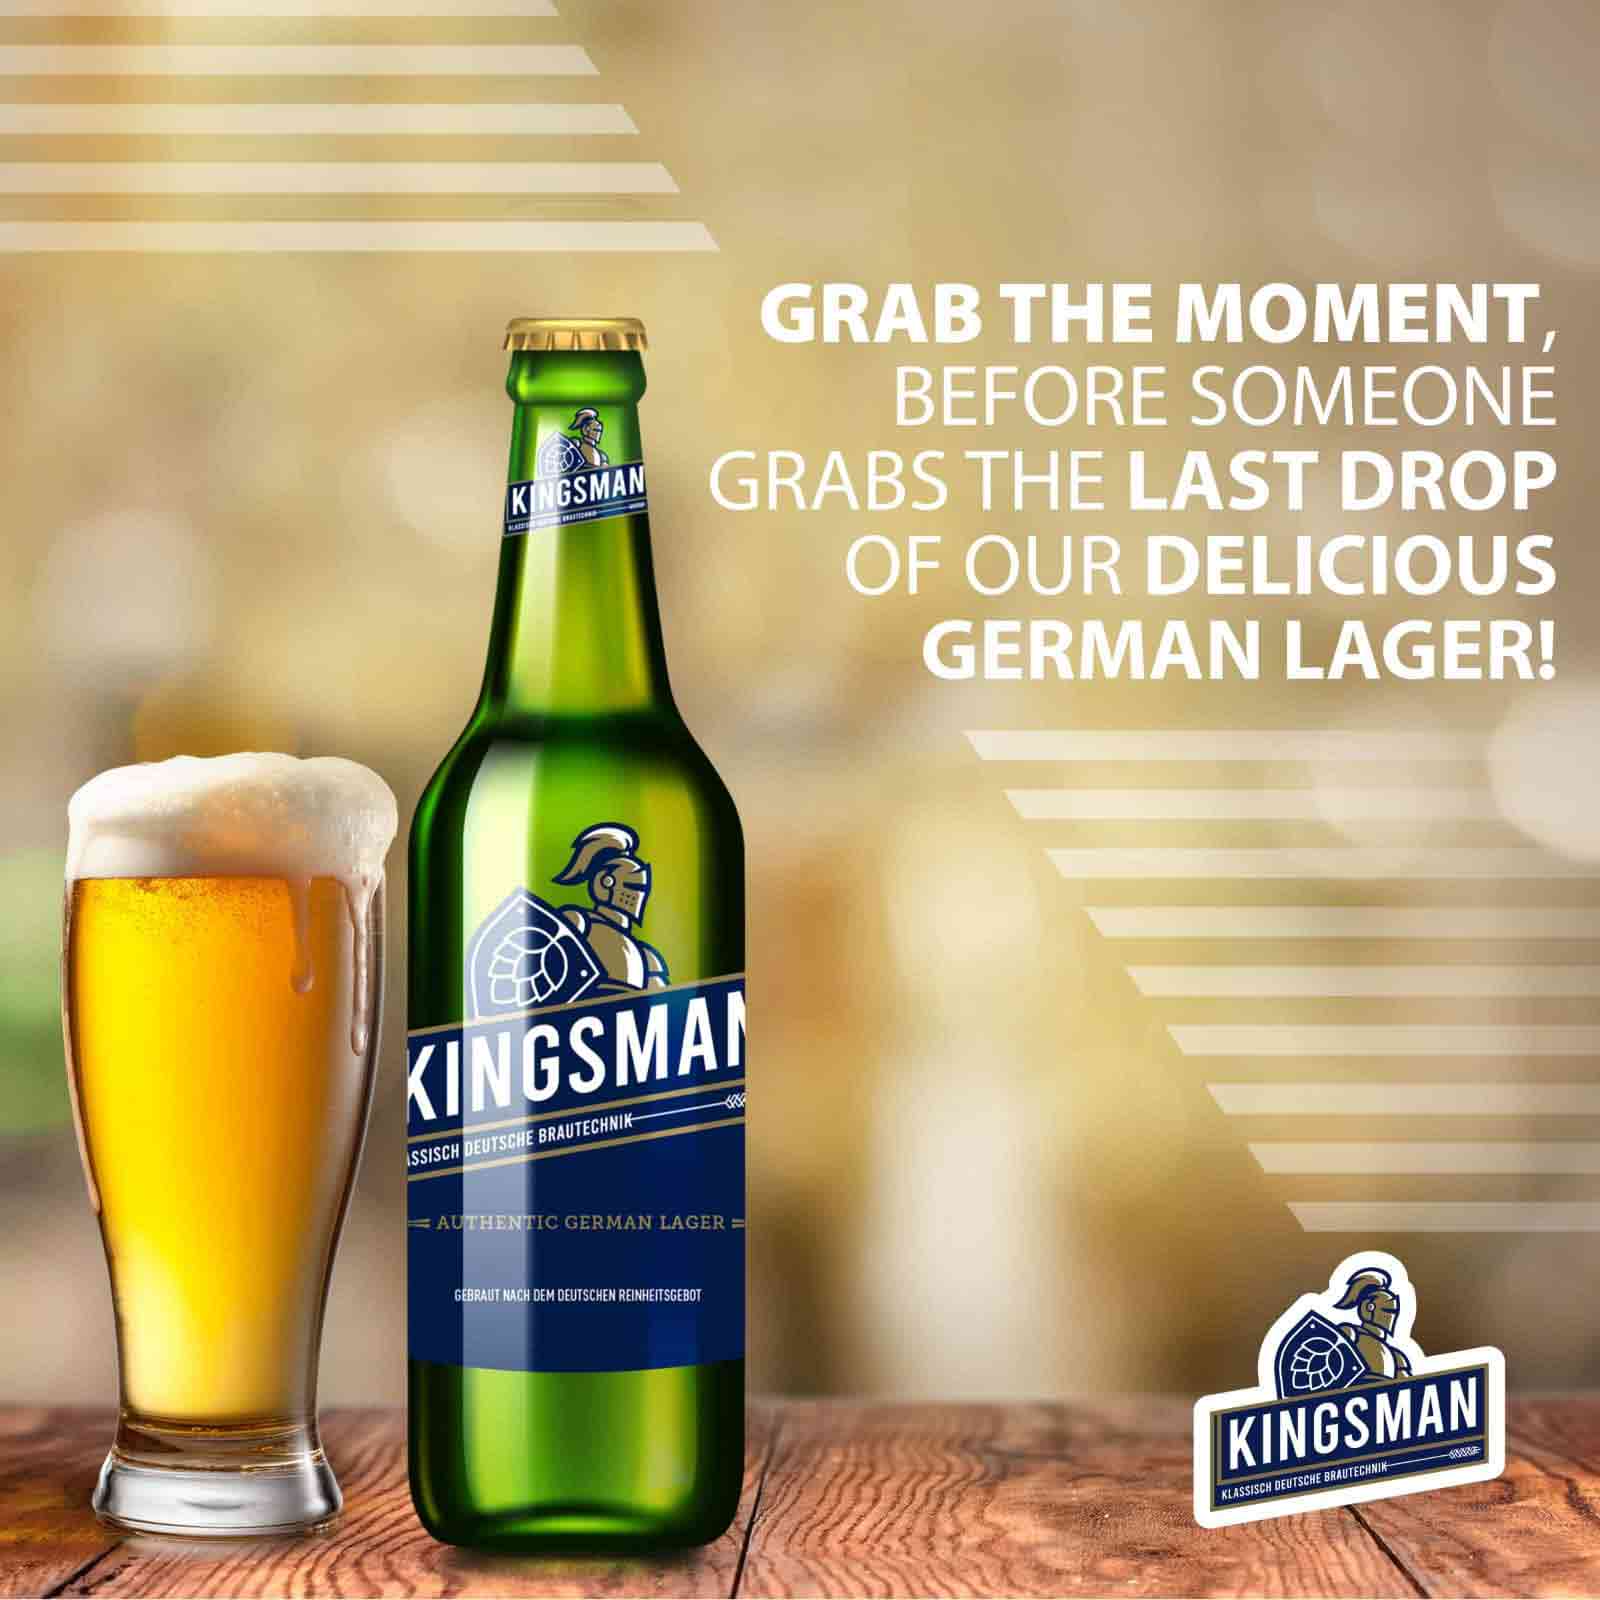 Enjoy the last drop of our delicious Kingsman beer